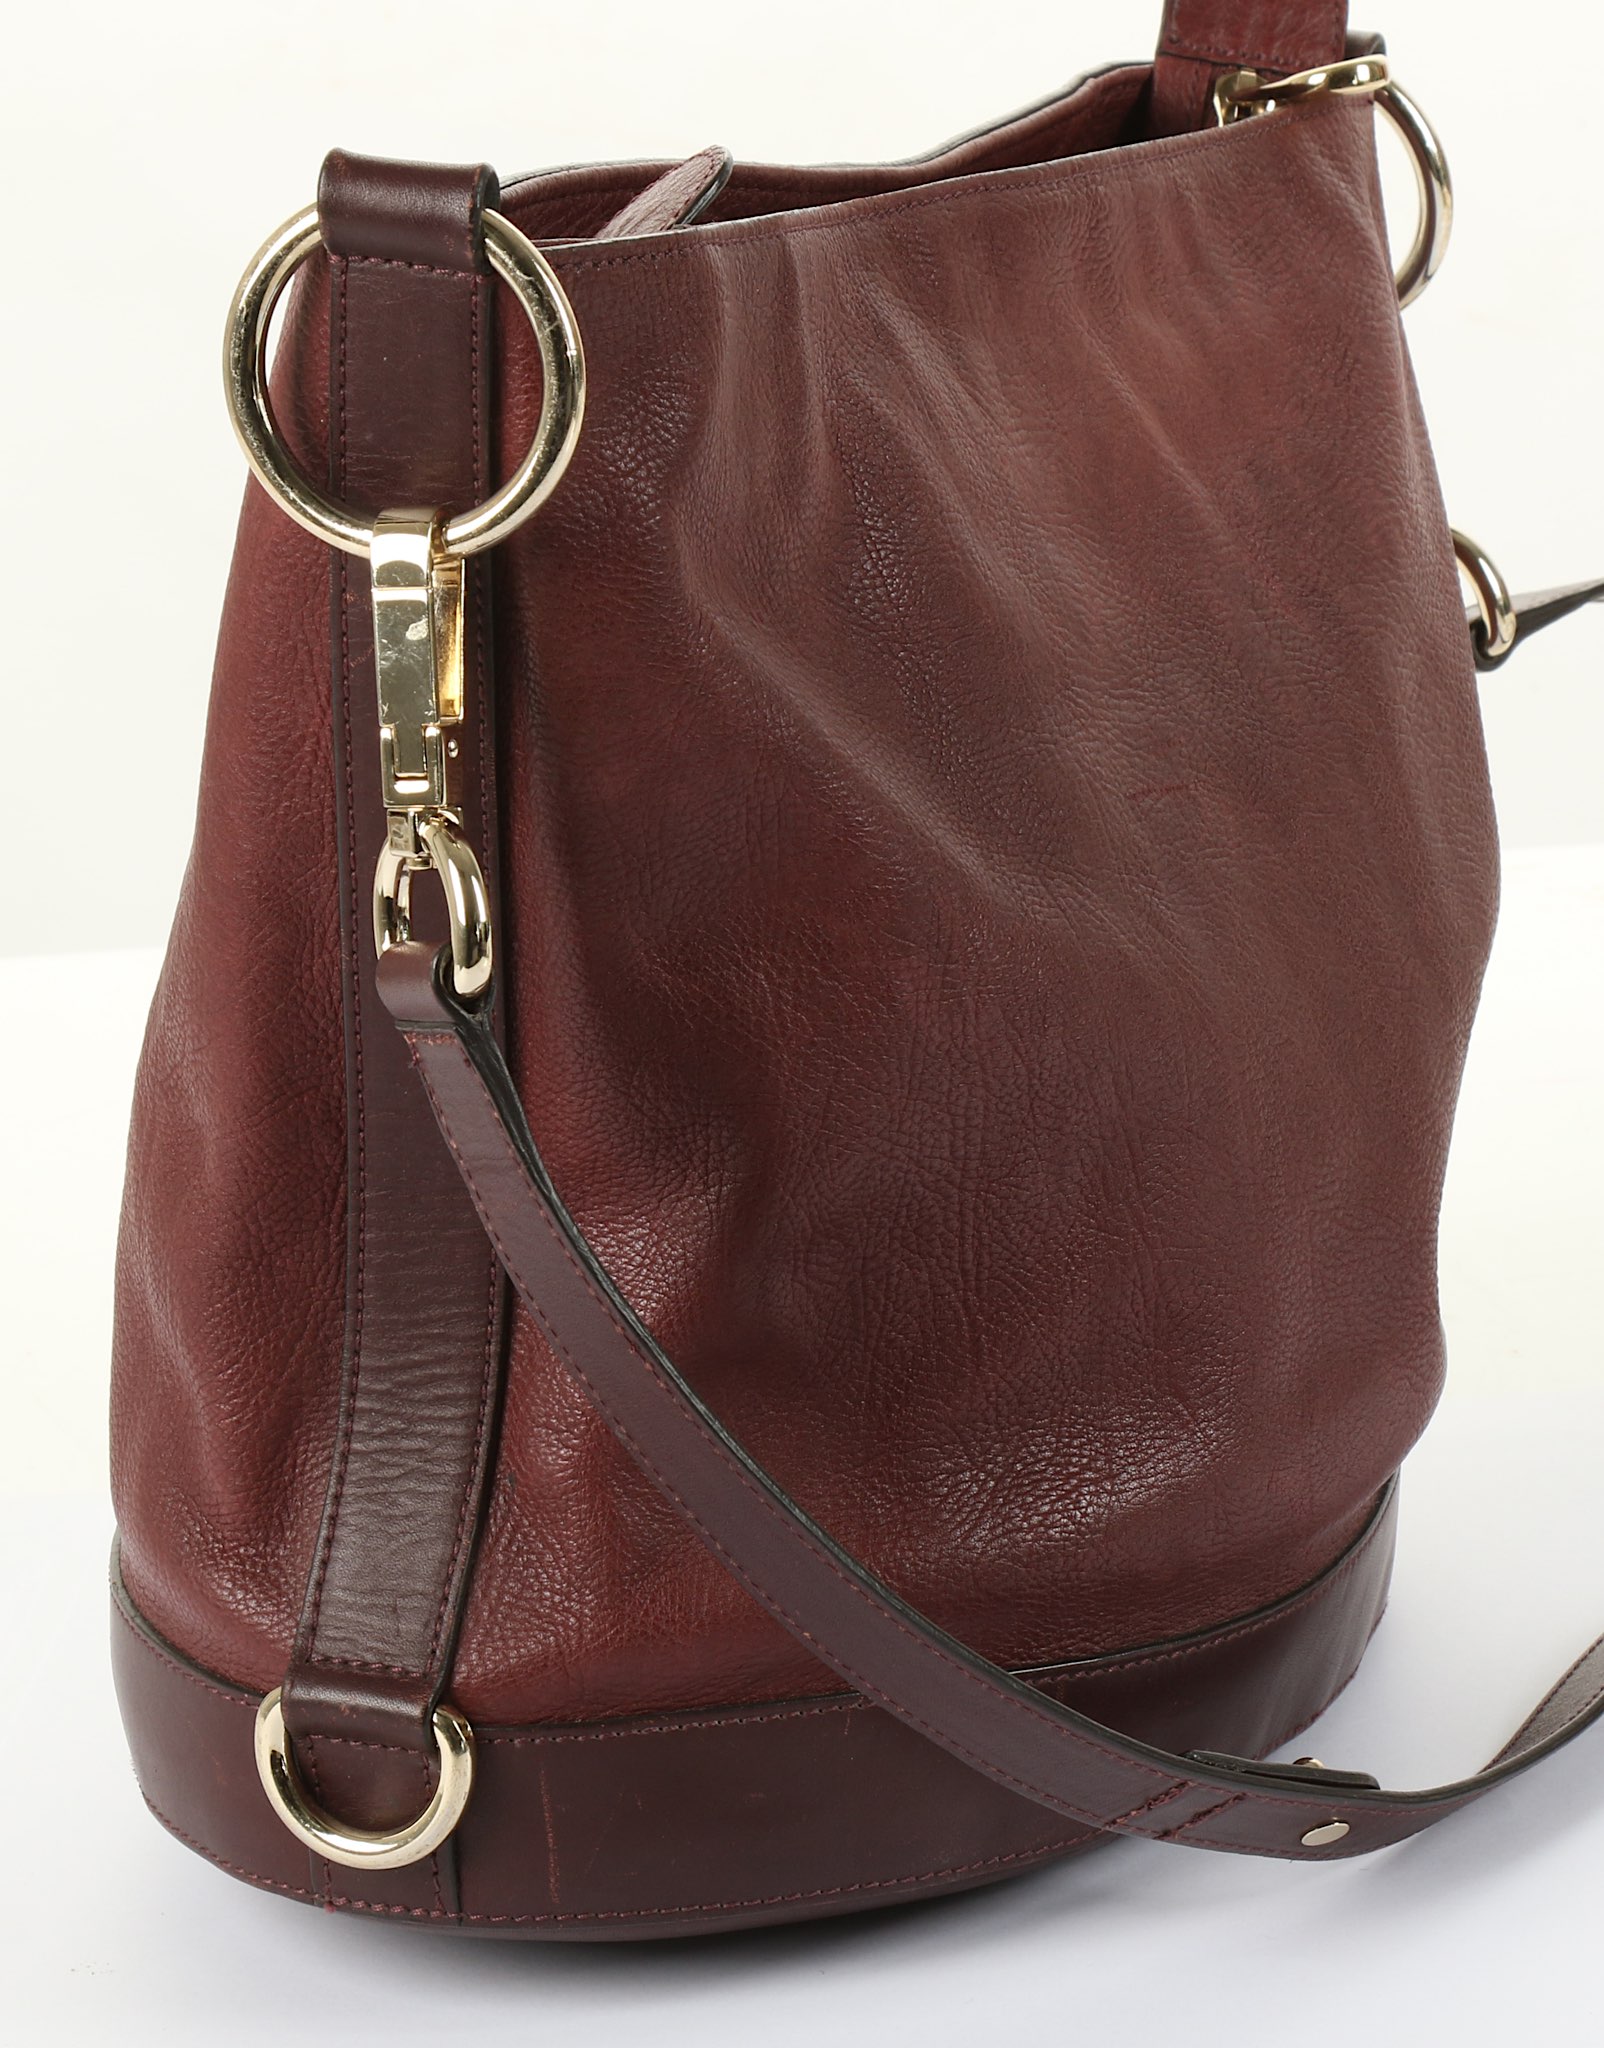 Mulberry Oxblood Jamie Bag, washed oxblood leather - Image 4 of 6